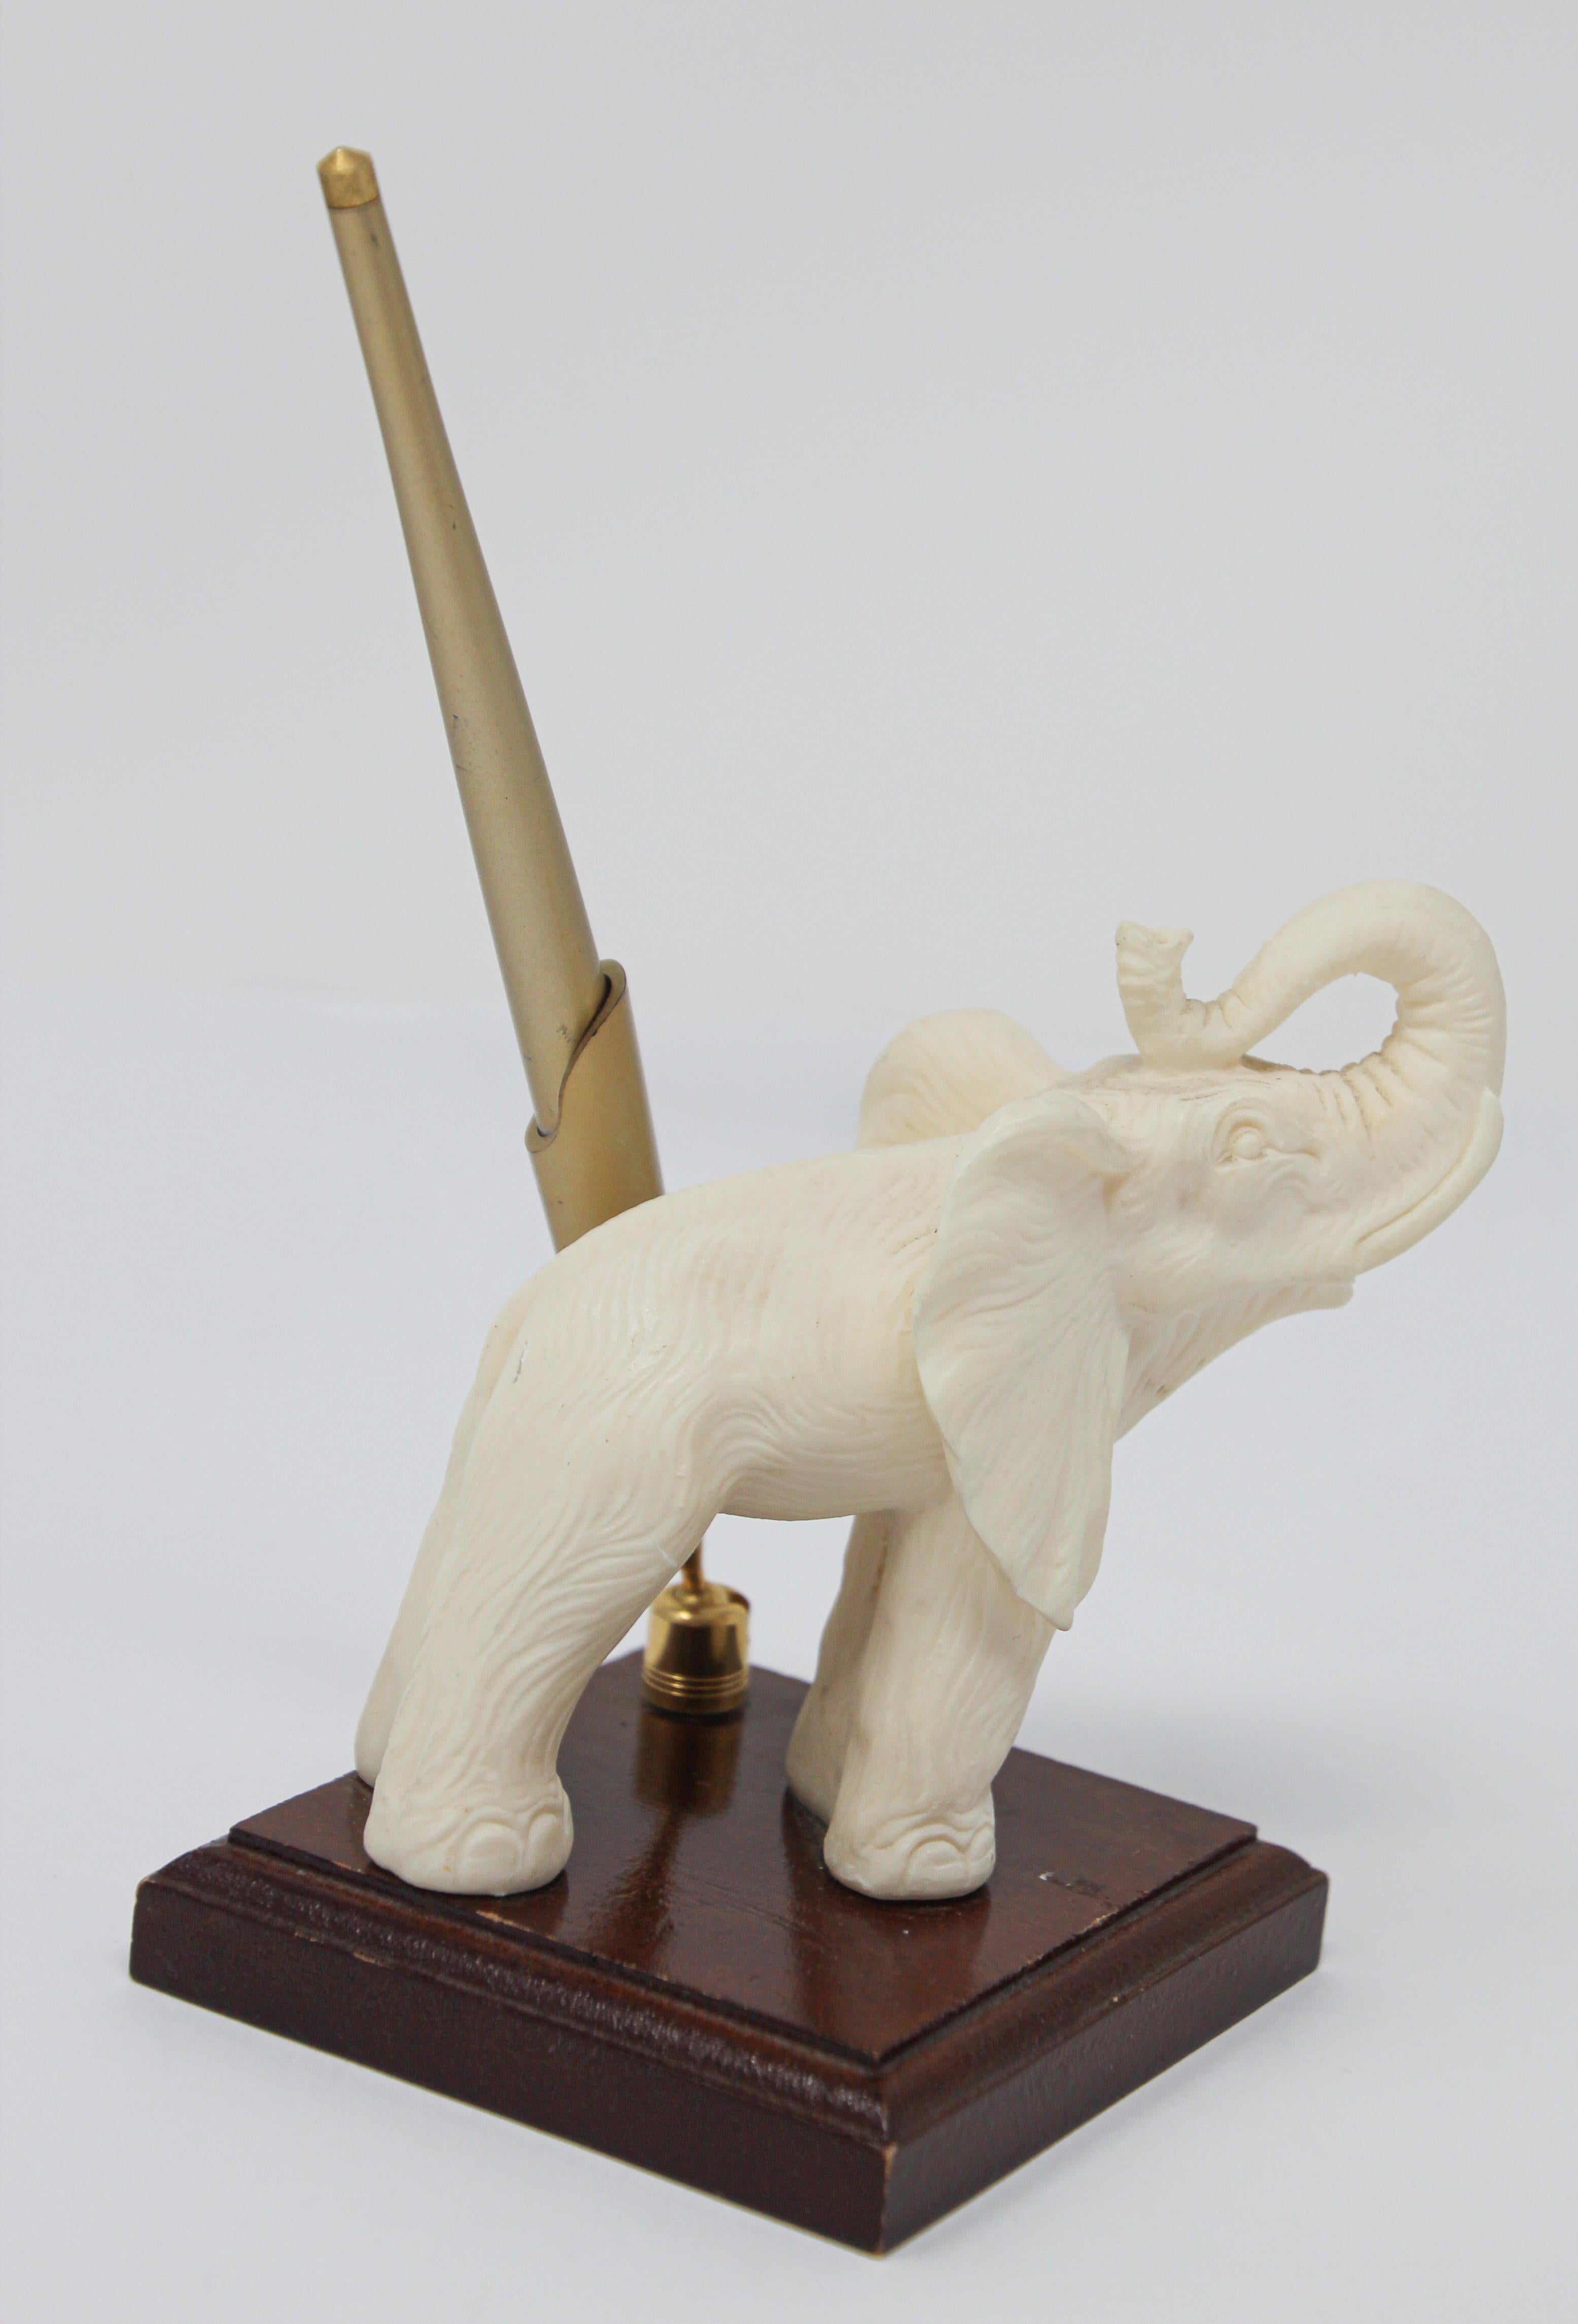 Elegant cast composite vintage sculpture that show a white elephant with his trunk up presented on a wooden stand and next to it a brass pen.
The representation of elephant in Asia represent wisdom, longevity and white is for peace.
White elephant